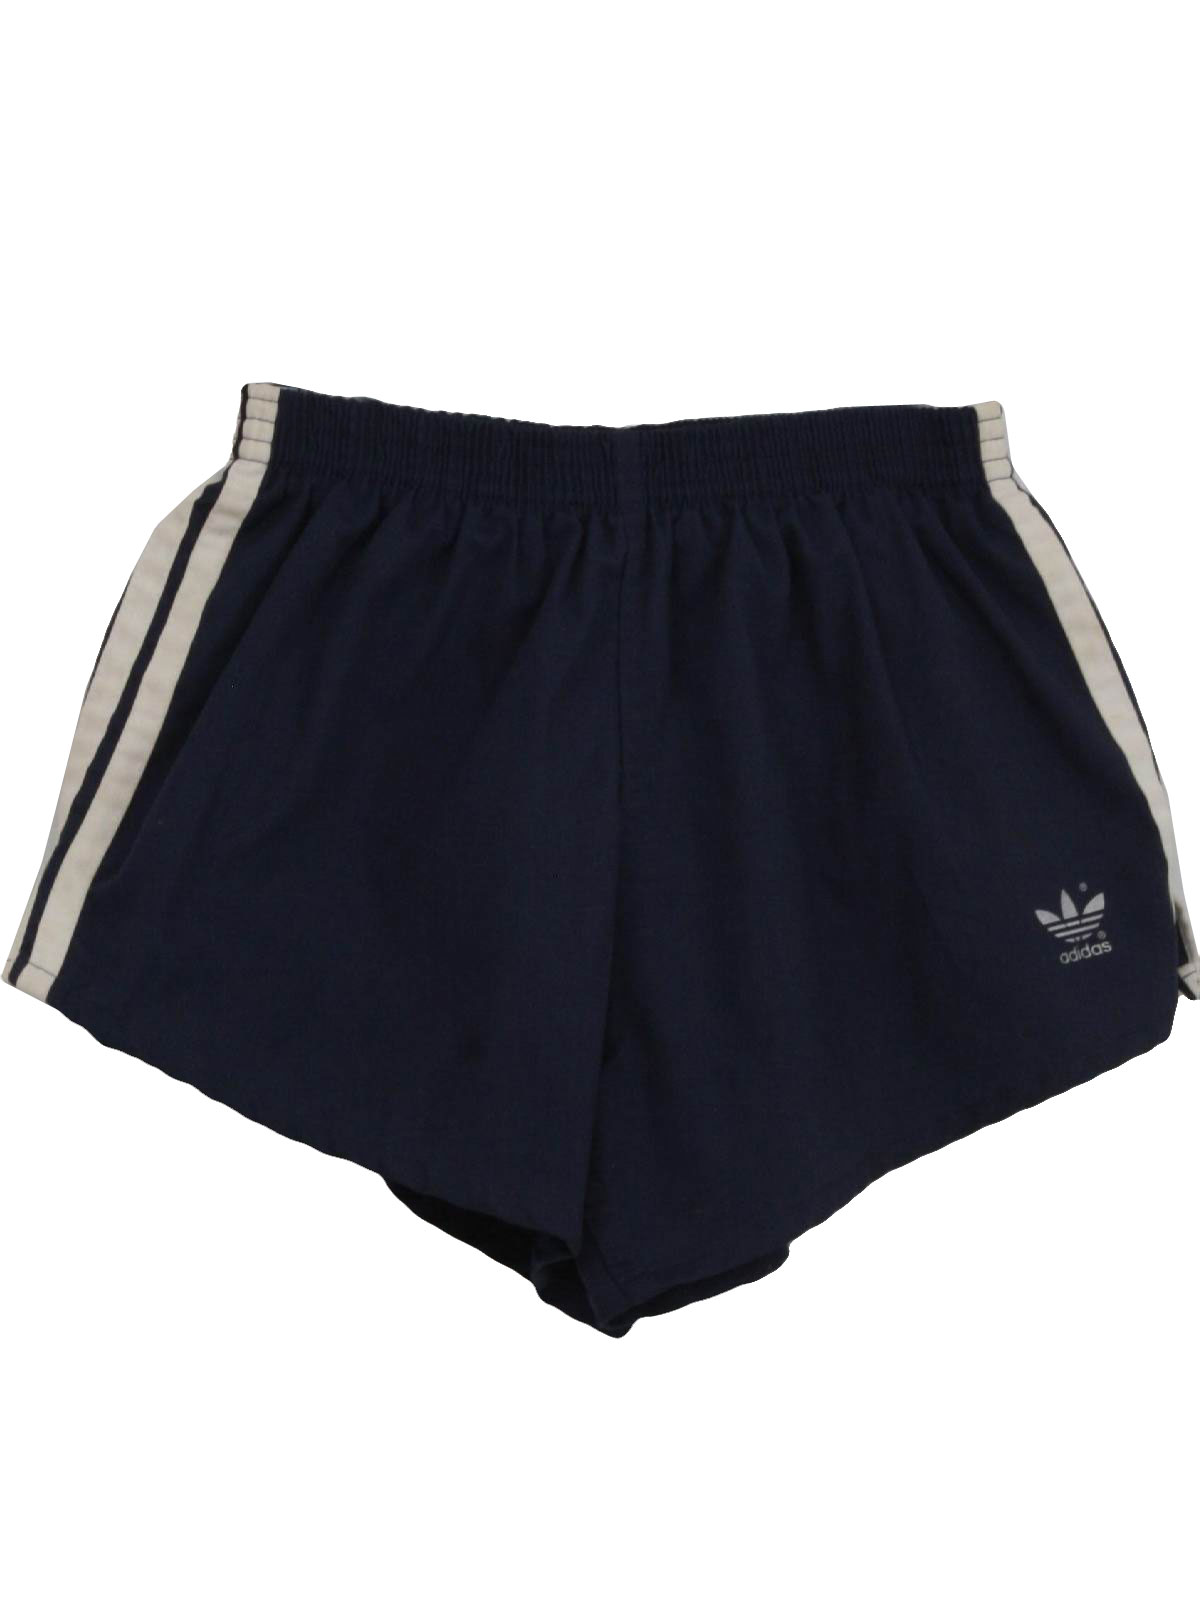 1980s Adidas Shorts: 80s -Adidas- Mens blue background polyester and ...